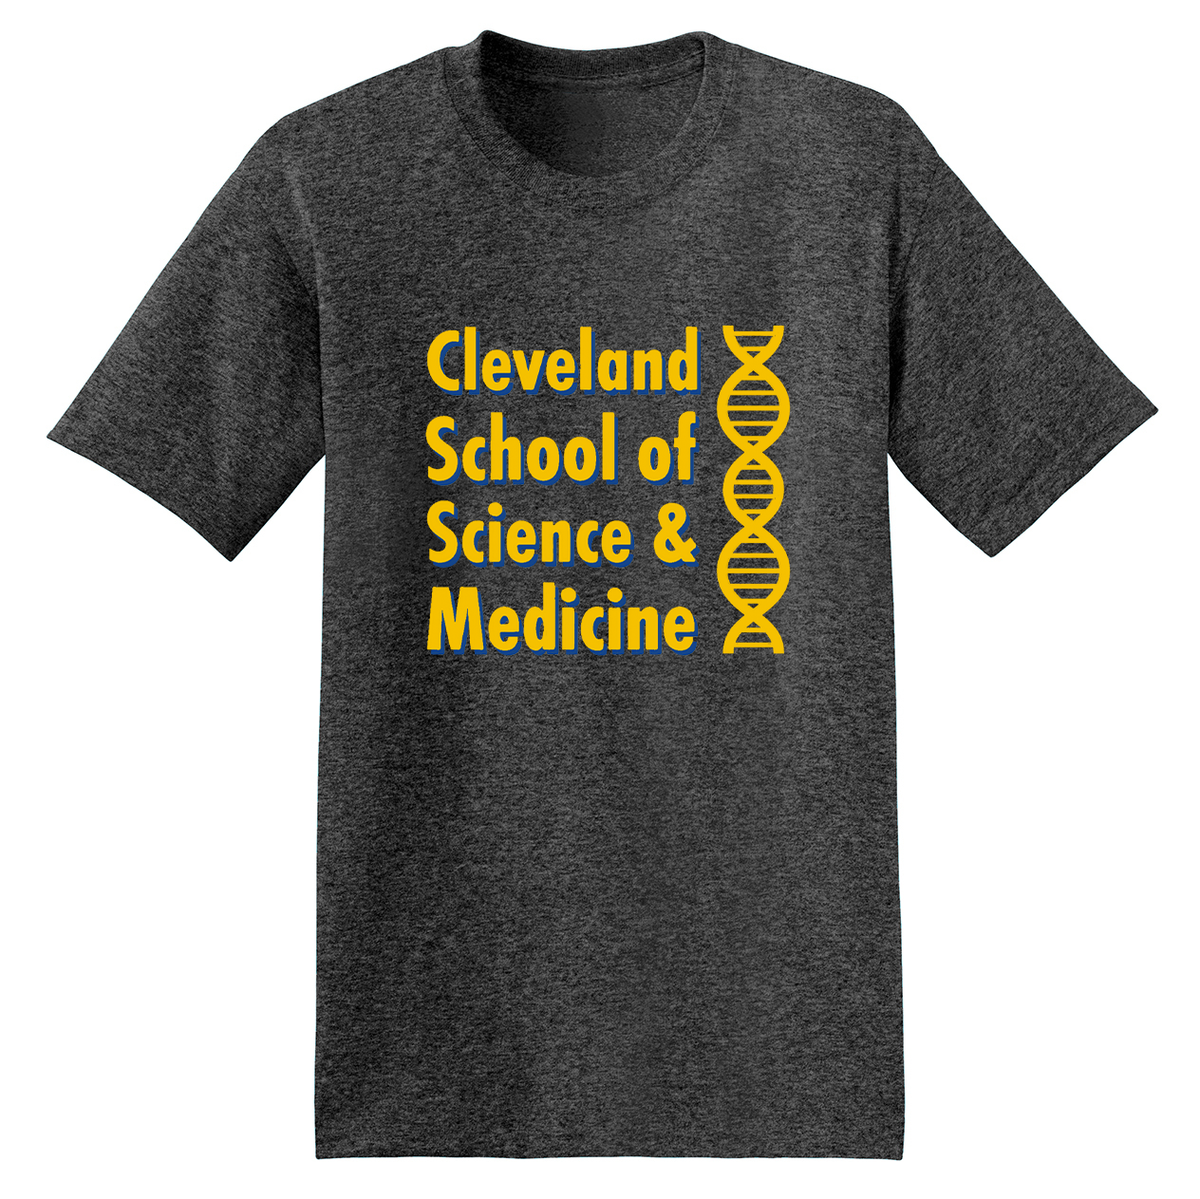 Cleveland School of Science and Medicine T-Shirt